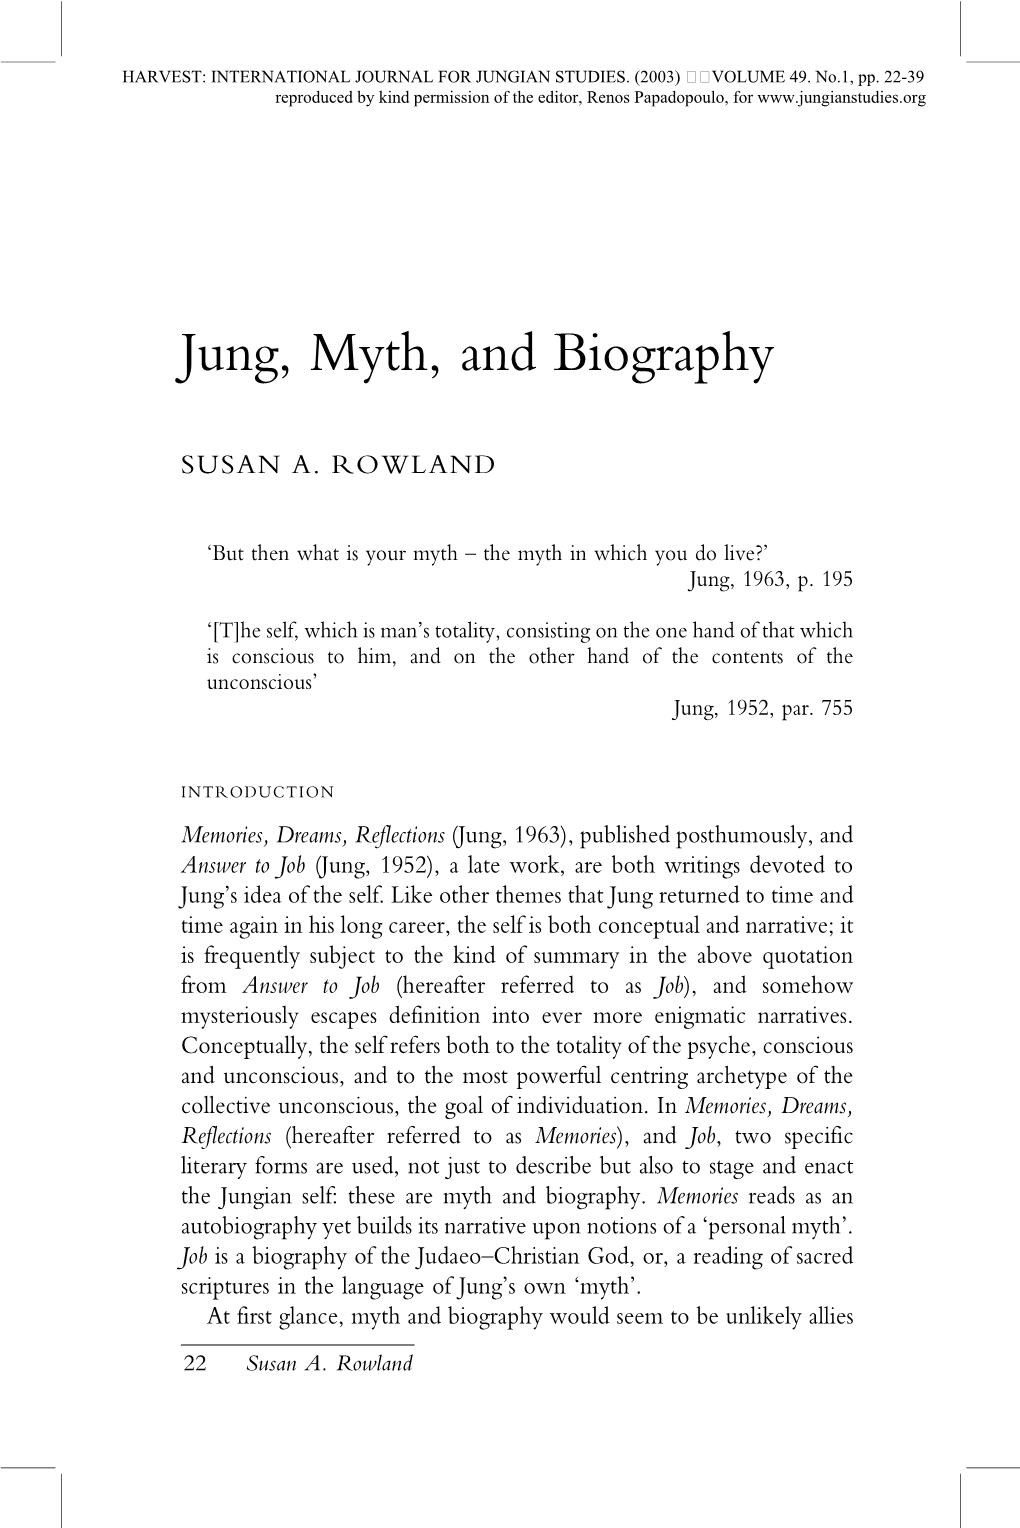 Jung, Myth and Biography by Susan A. Rowland